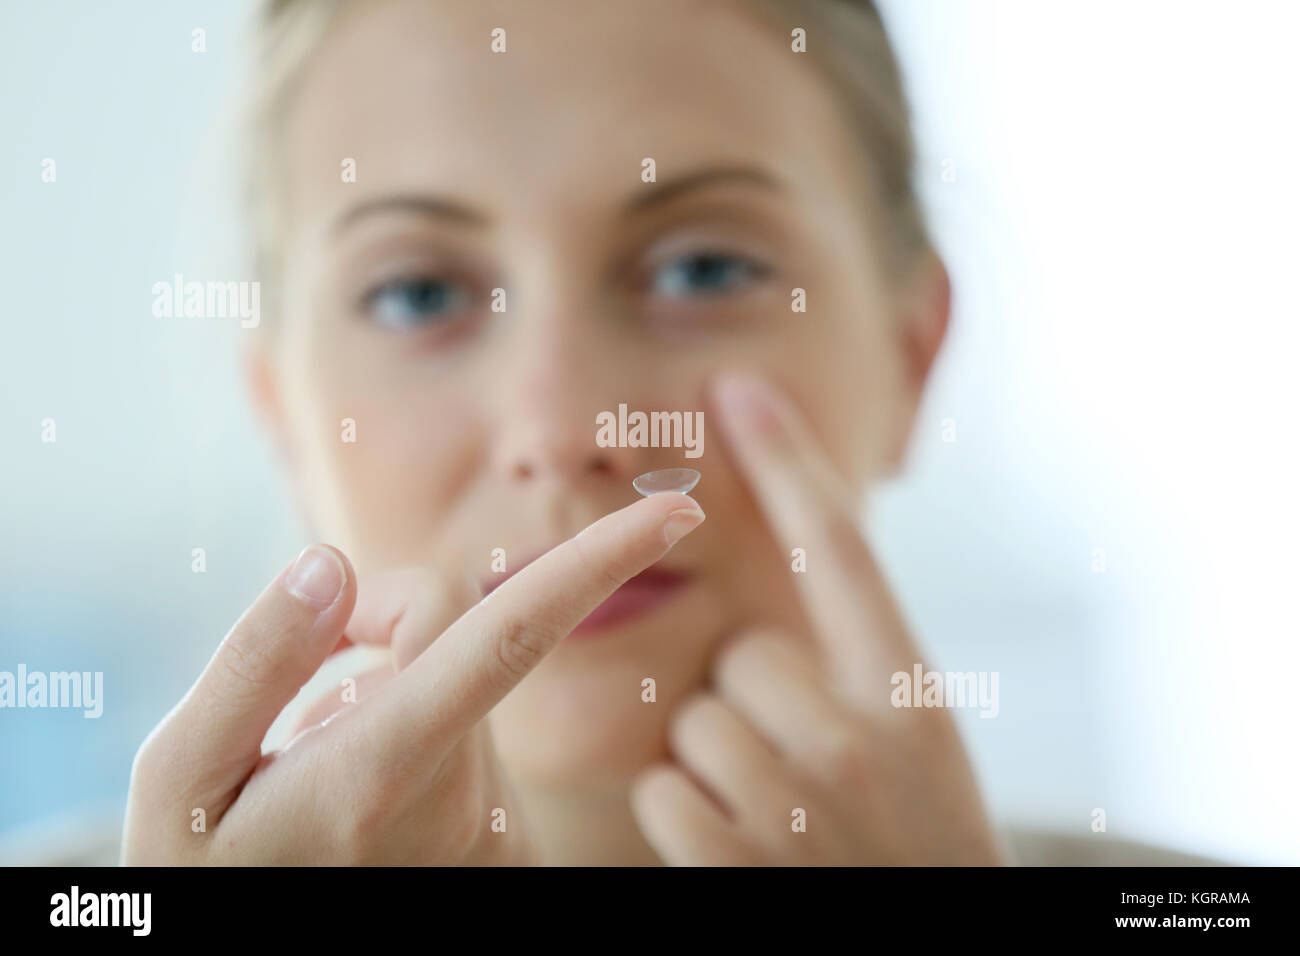 Young woman putting eye contact lense on Stock Photo